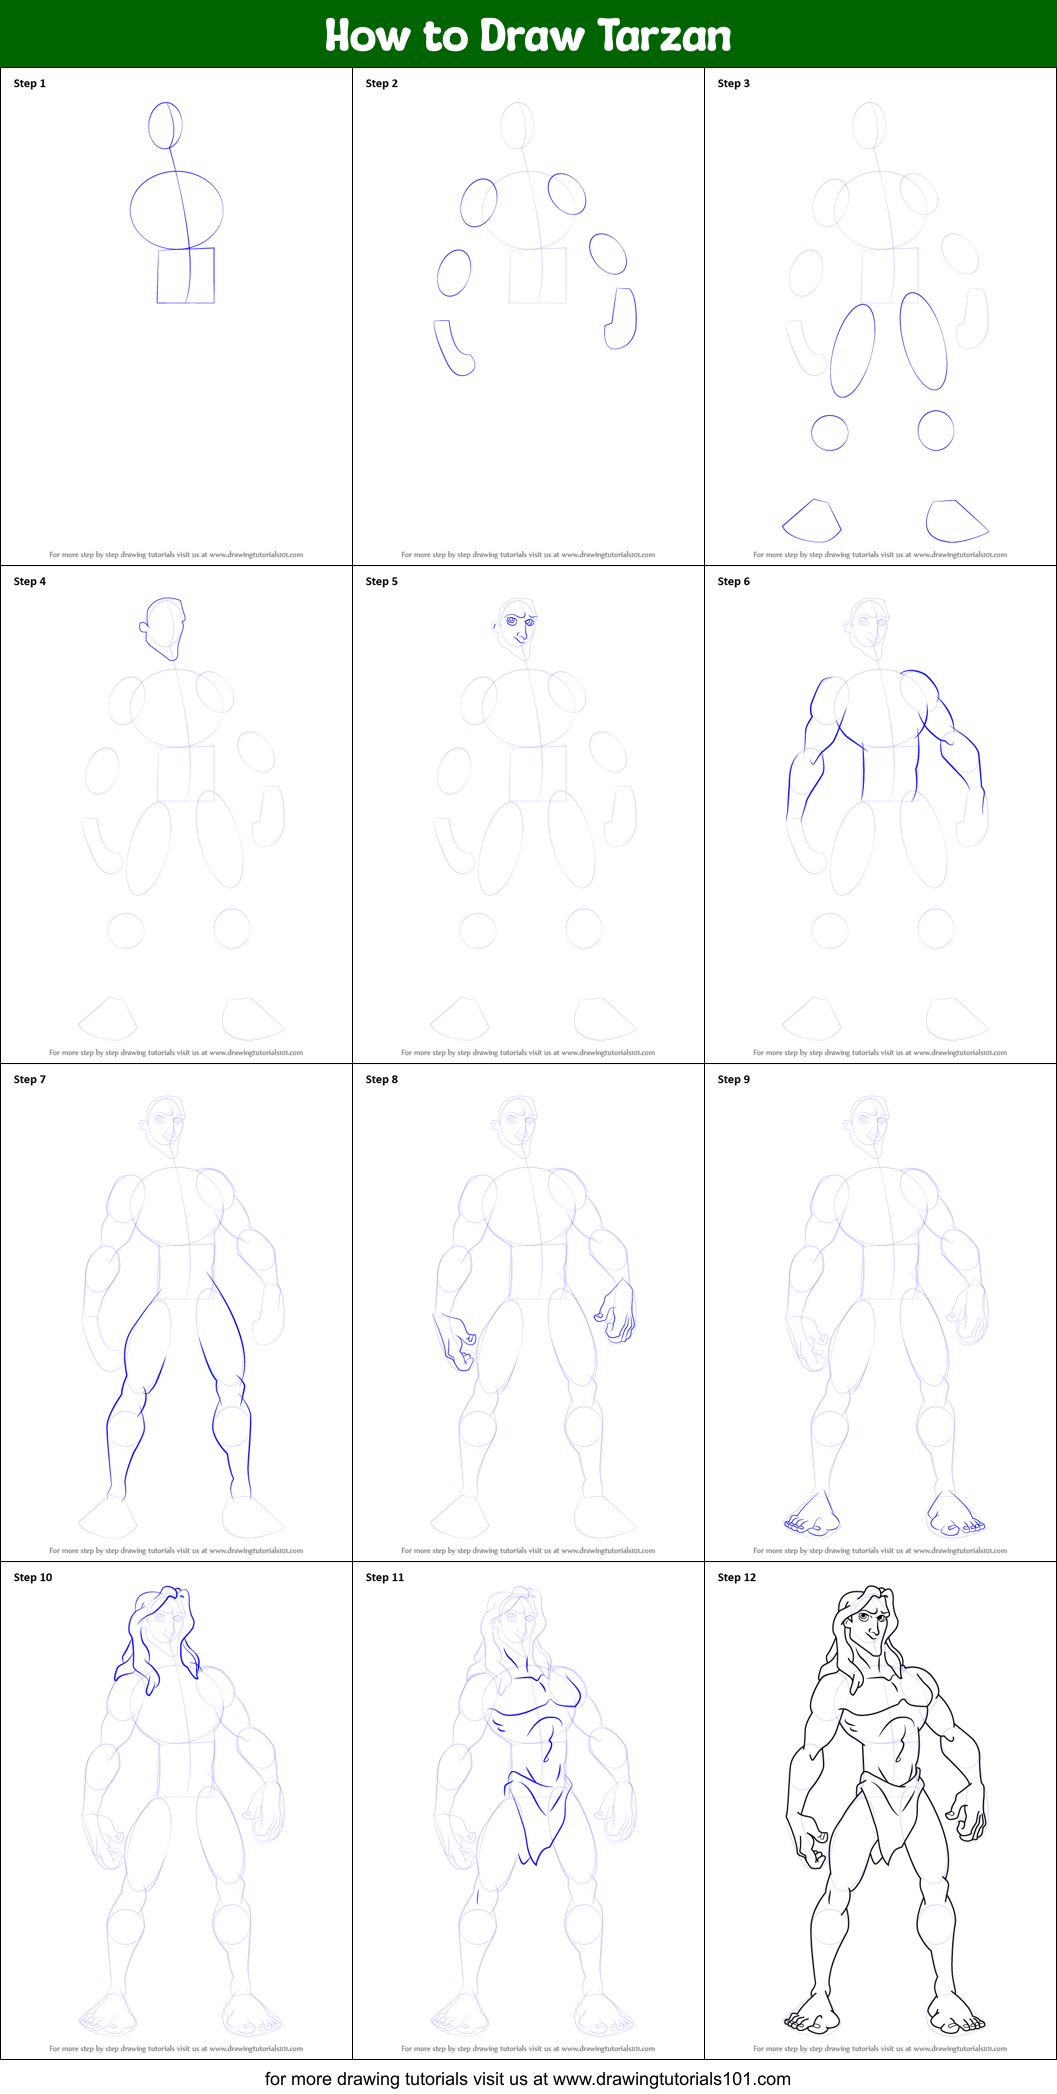 How to Draw Tarzan printable step by step drawing sheet